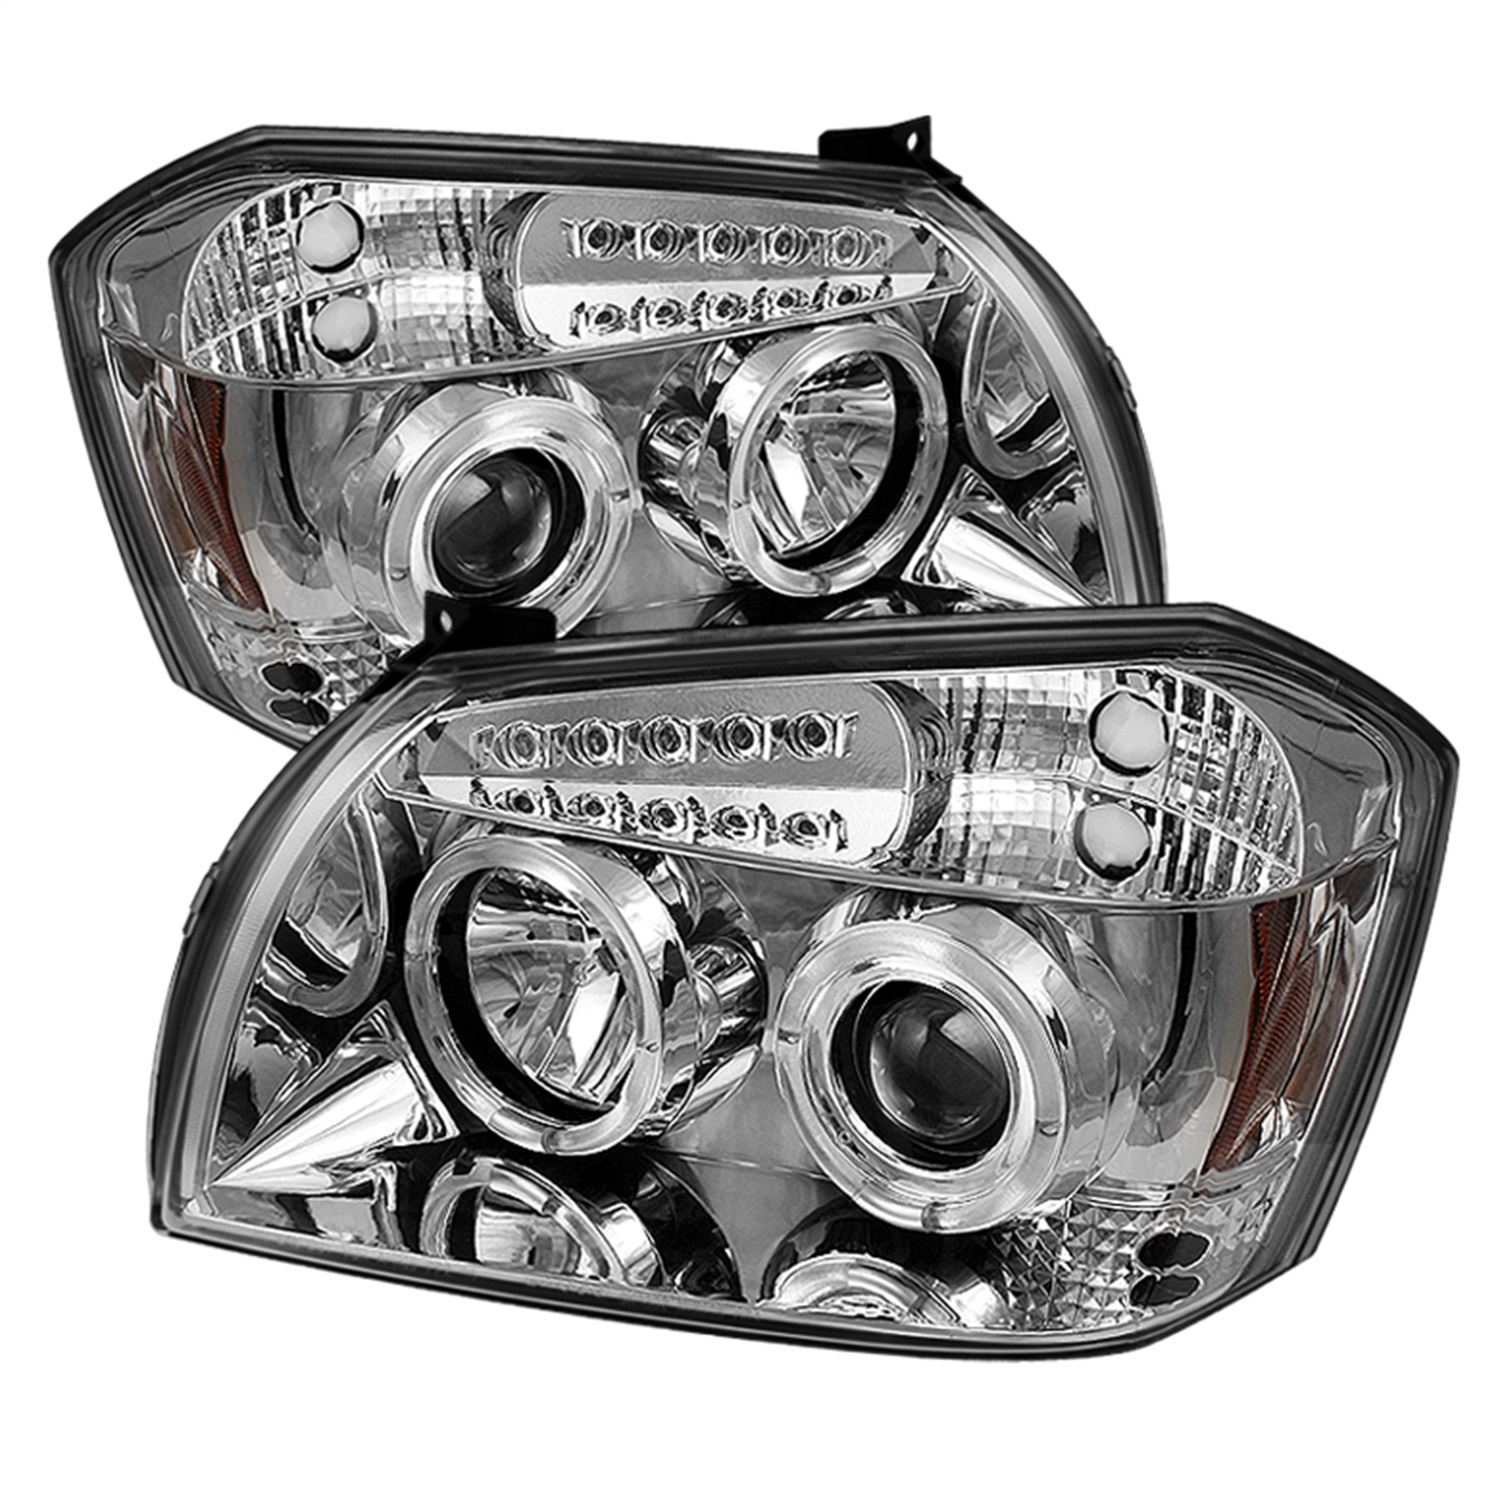 Spyder Auto 5009883 Halo LED Projector Headlights Fits 05-07 Magnum